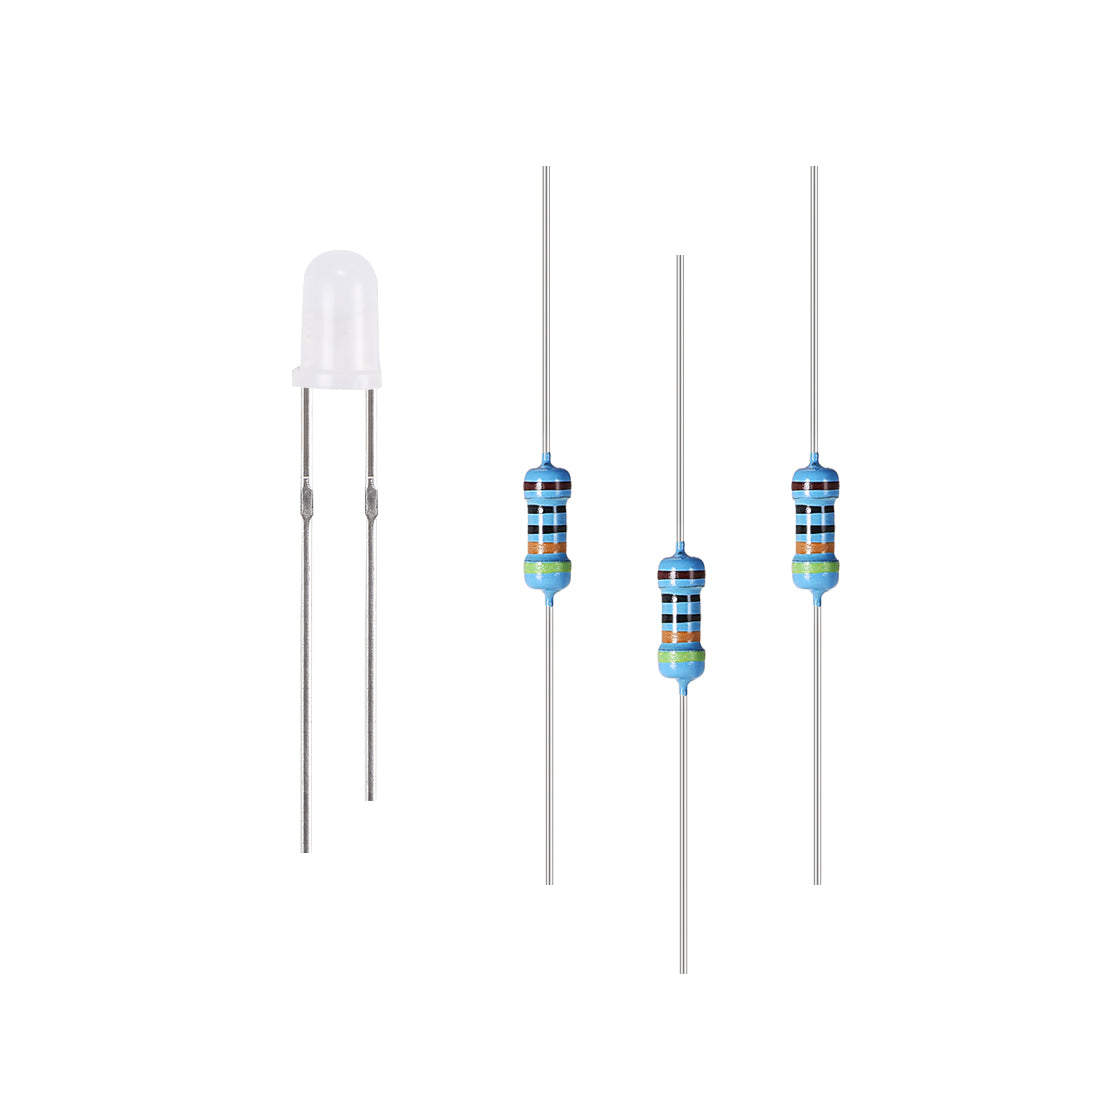 Uxcell Uxcell 100Set 3mm LED Diodes W Resistor, Diffused Emerald Green, Round Head 19mm Pin